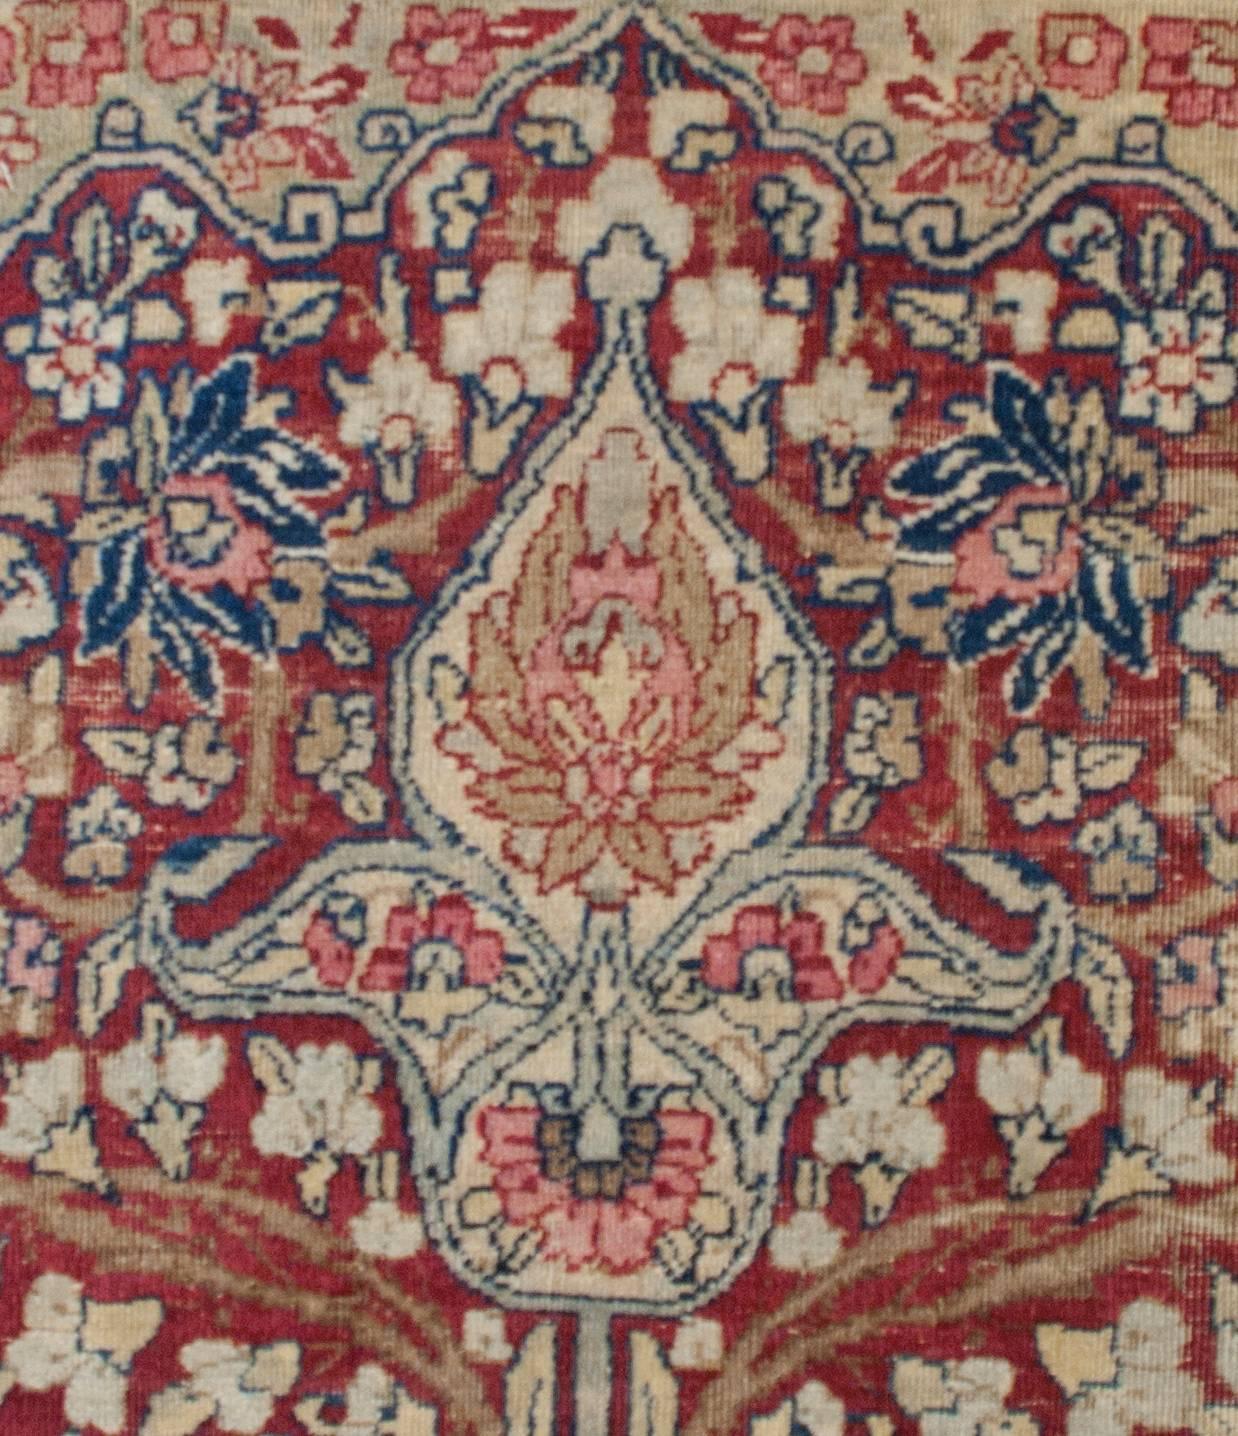 Vegetable Dyed Notable 19th Century Pictorial Kirman Rug For Sale